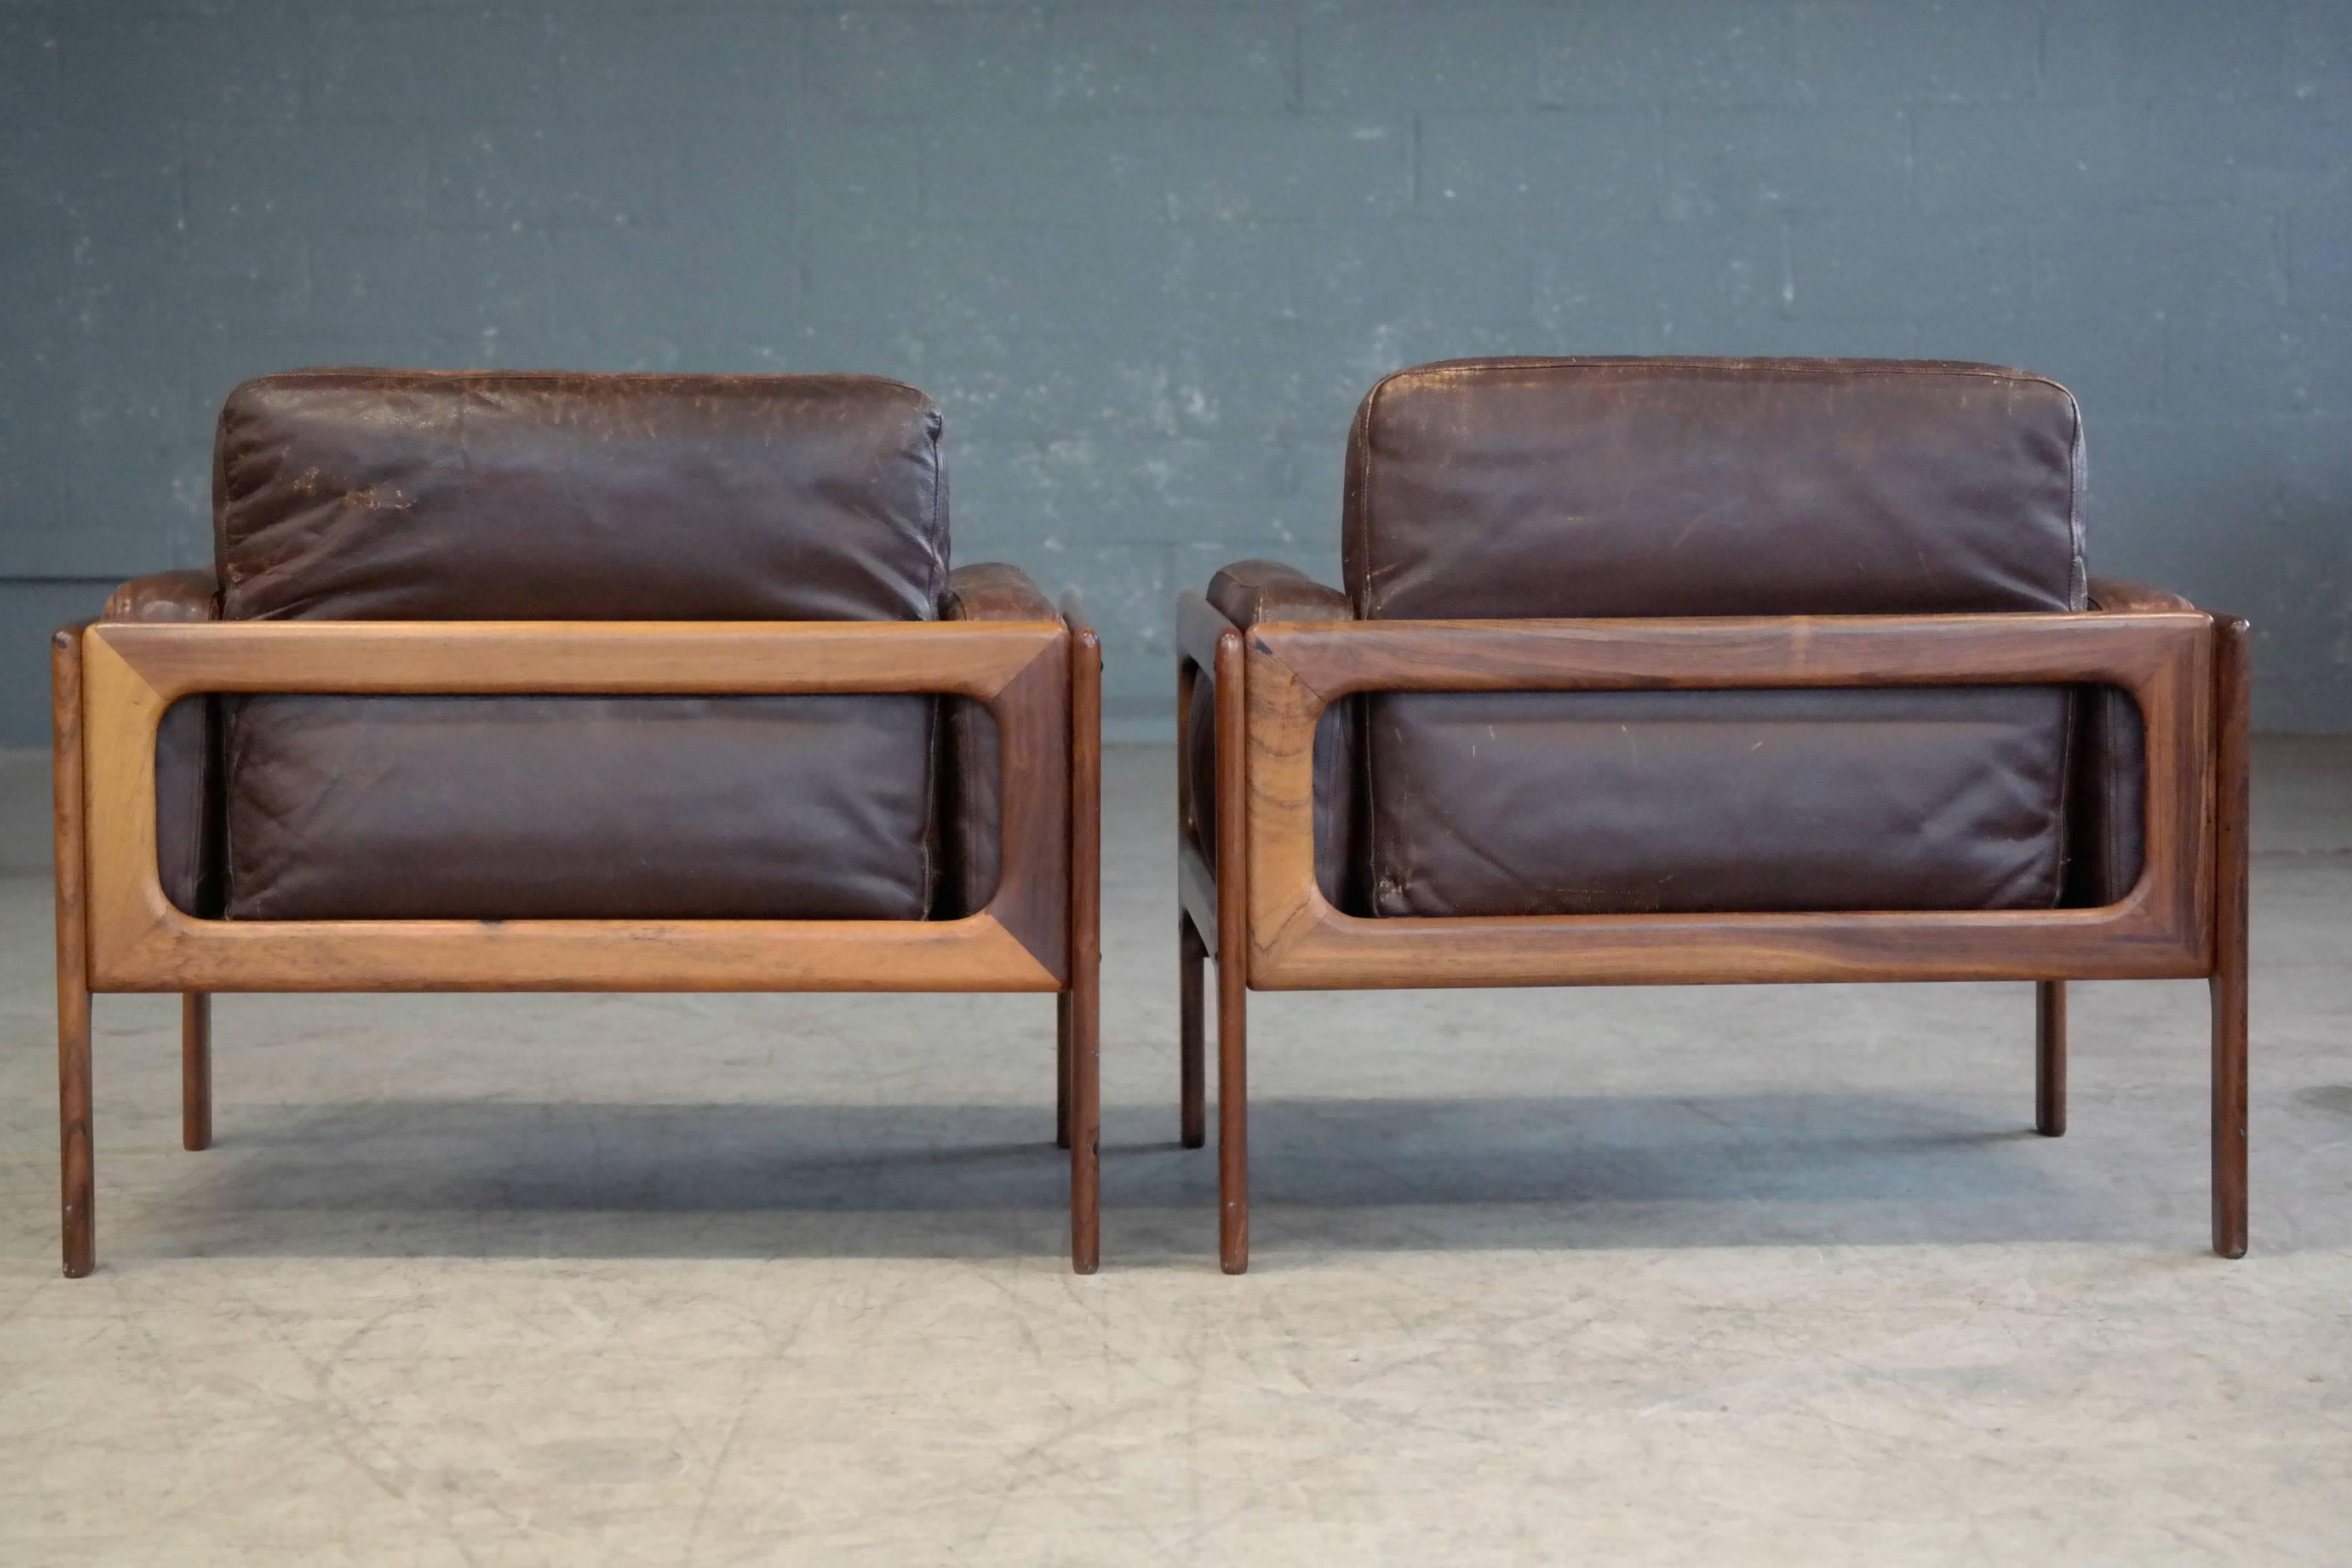 Arne Wahl Iversen Pair of Easy Chairs in Rosewood and Leather for Komfort Mobler 2